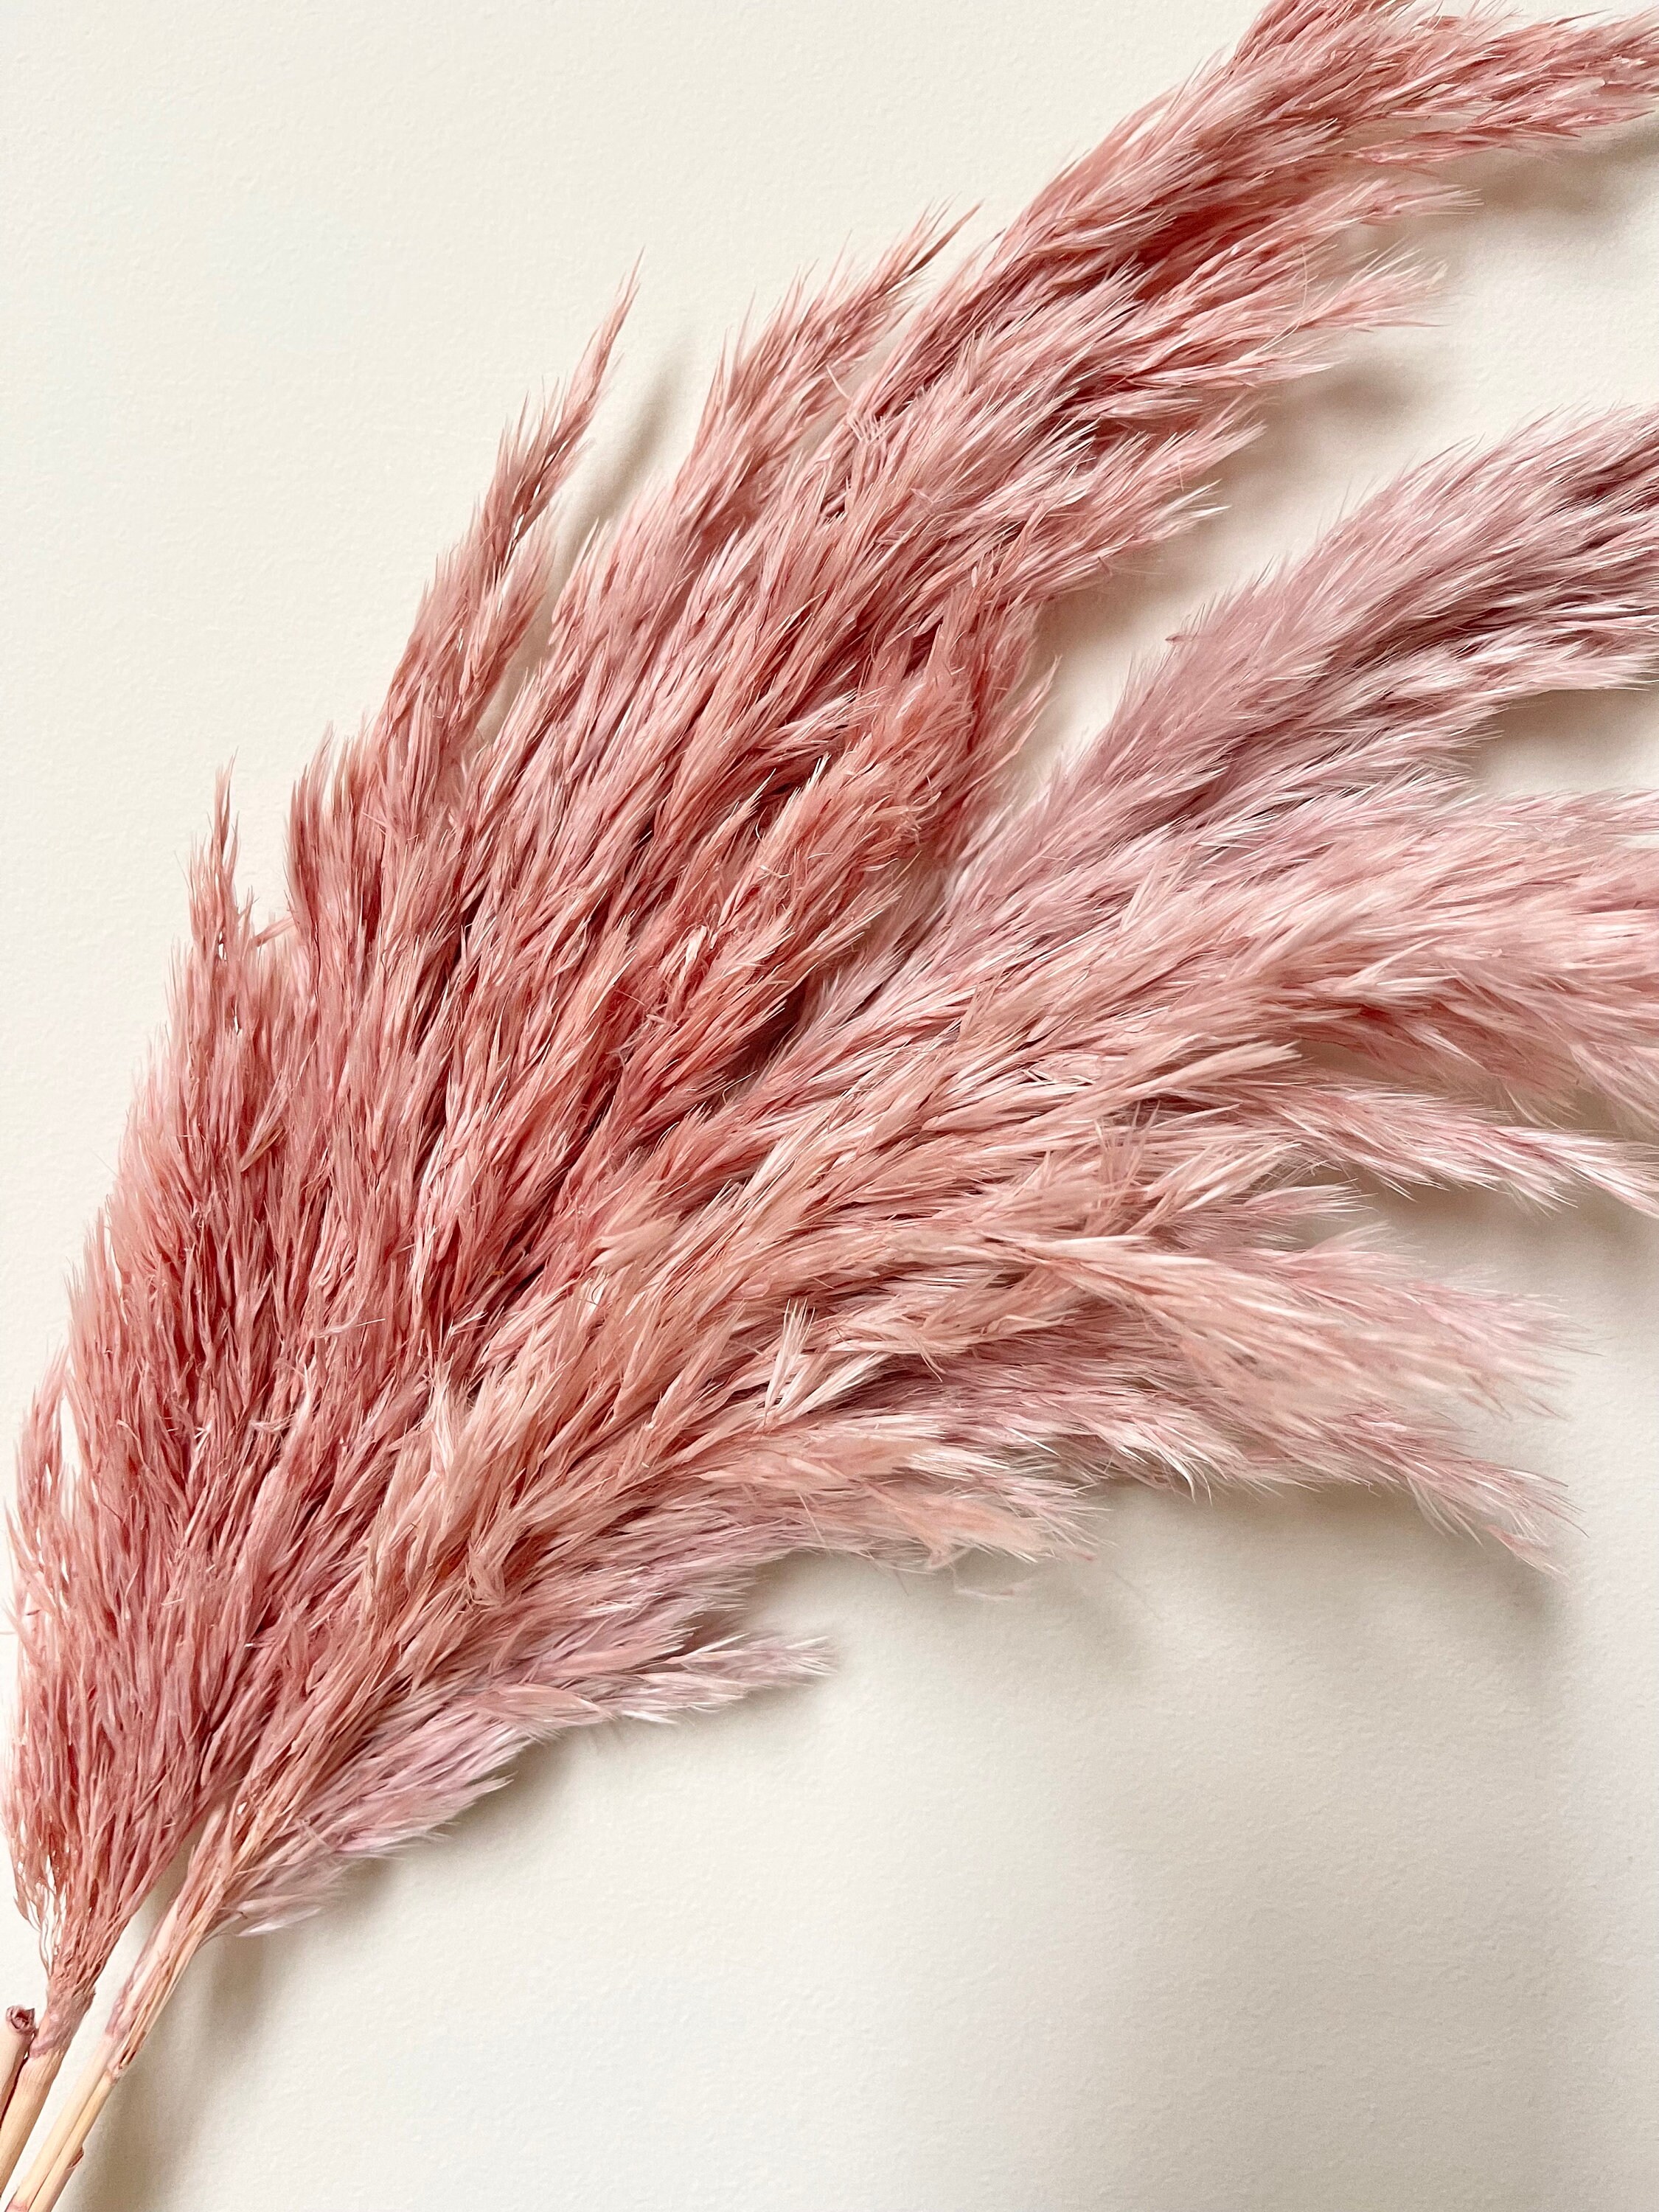 Bouquet Dried Hot Pink Flowers, Pink, Red and White Flowers, Flower  Arrangement, Pampas, Bunny Tails,everlasting Flowers Bride Bouquet 